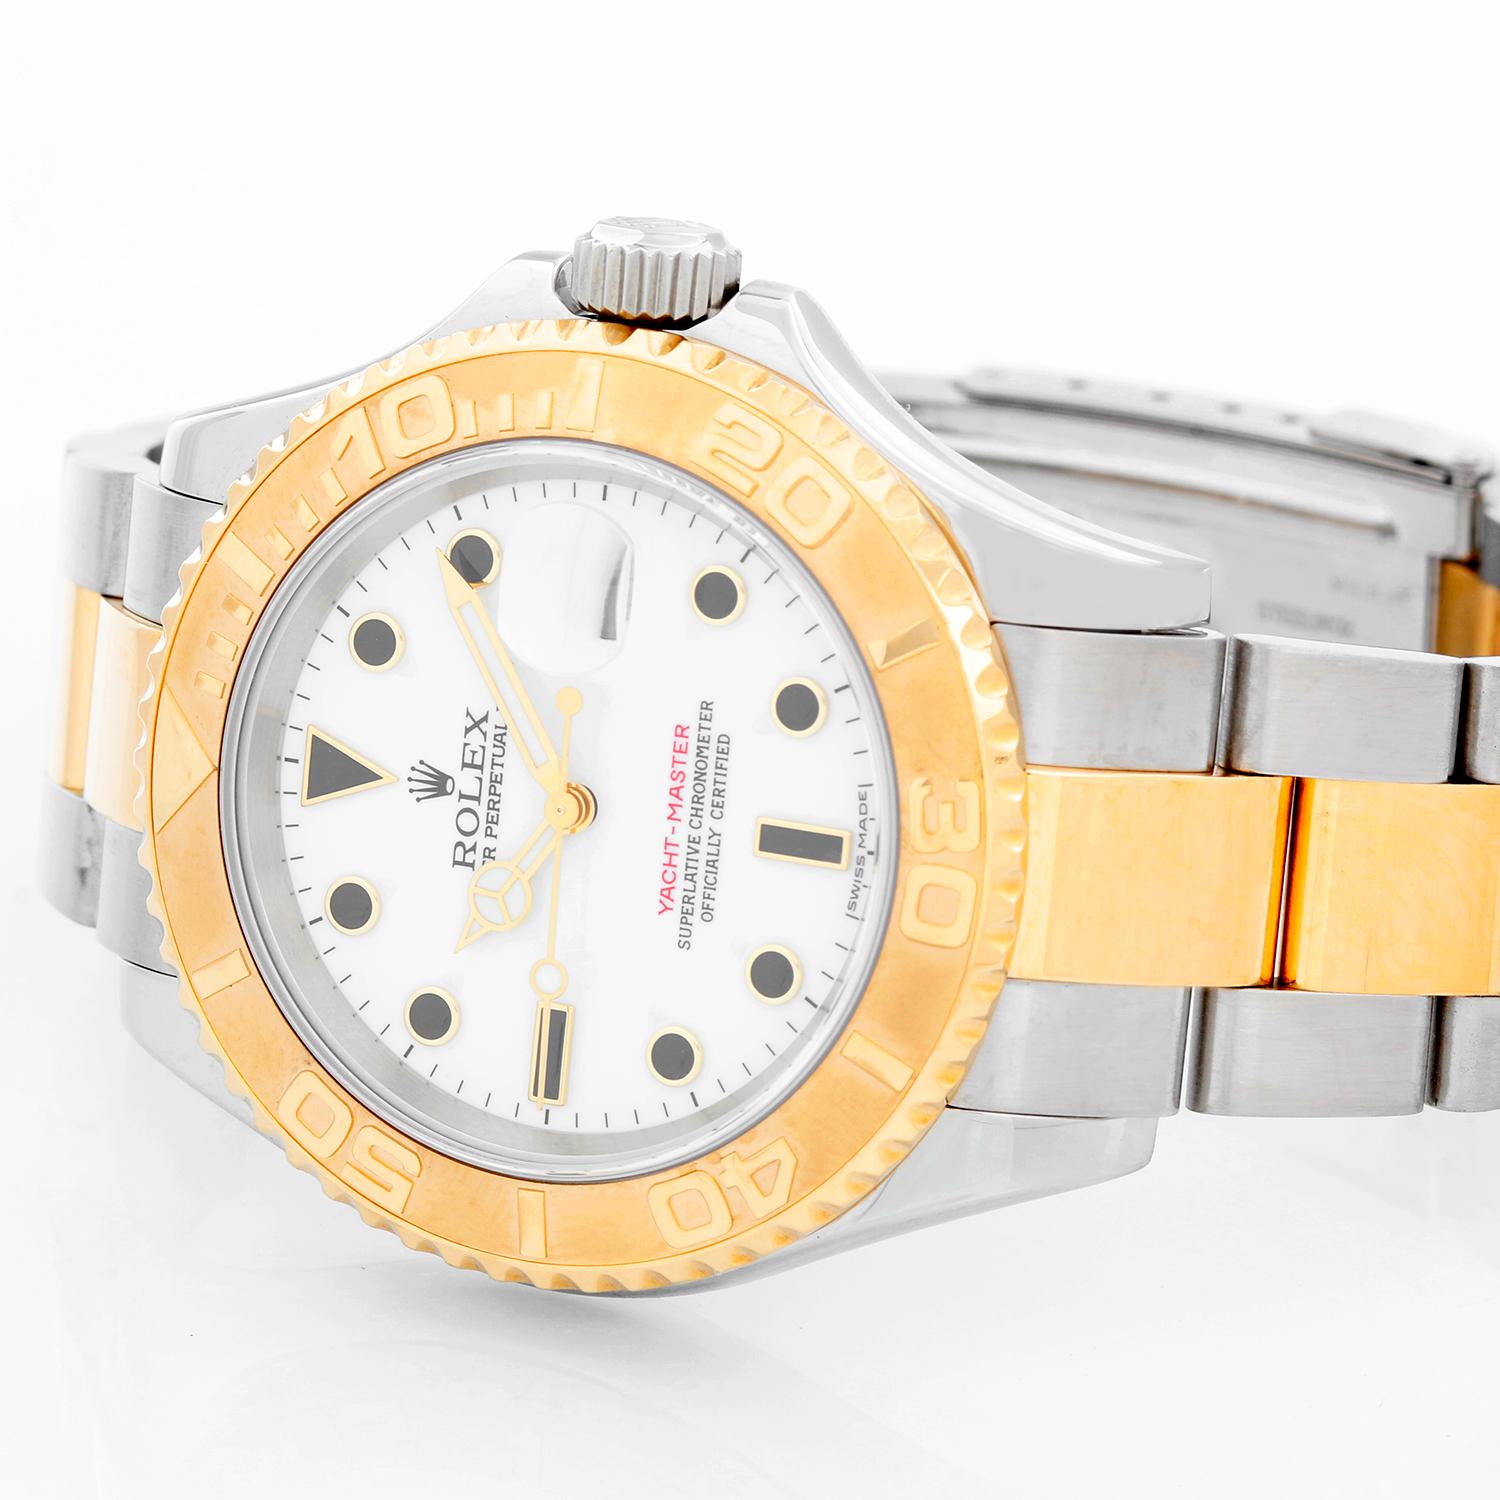 Rolex Yacht-Master Steel & Gold Men's 2-Tone Watch 16623 - Automatic winding, 31 jewels, Quickset, sapphire crystal. Stainless steel case with 18k yellow gold bezel  (40mm diameter). White dial with luminous hour markers . Stainless steel and 18k